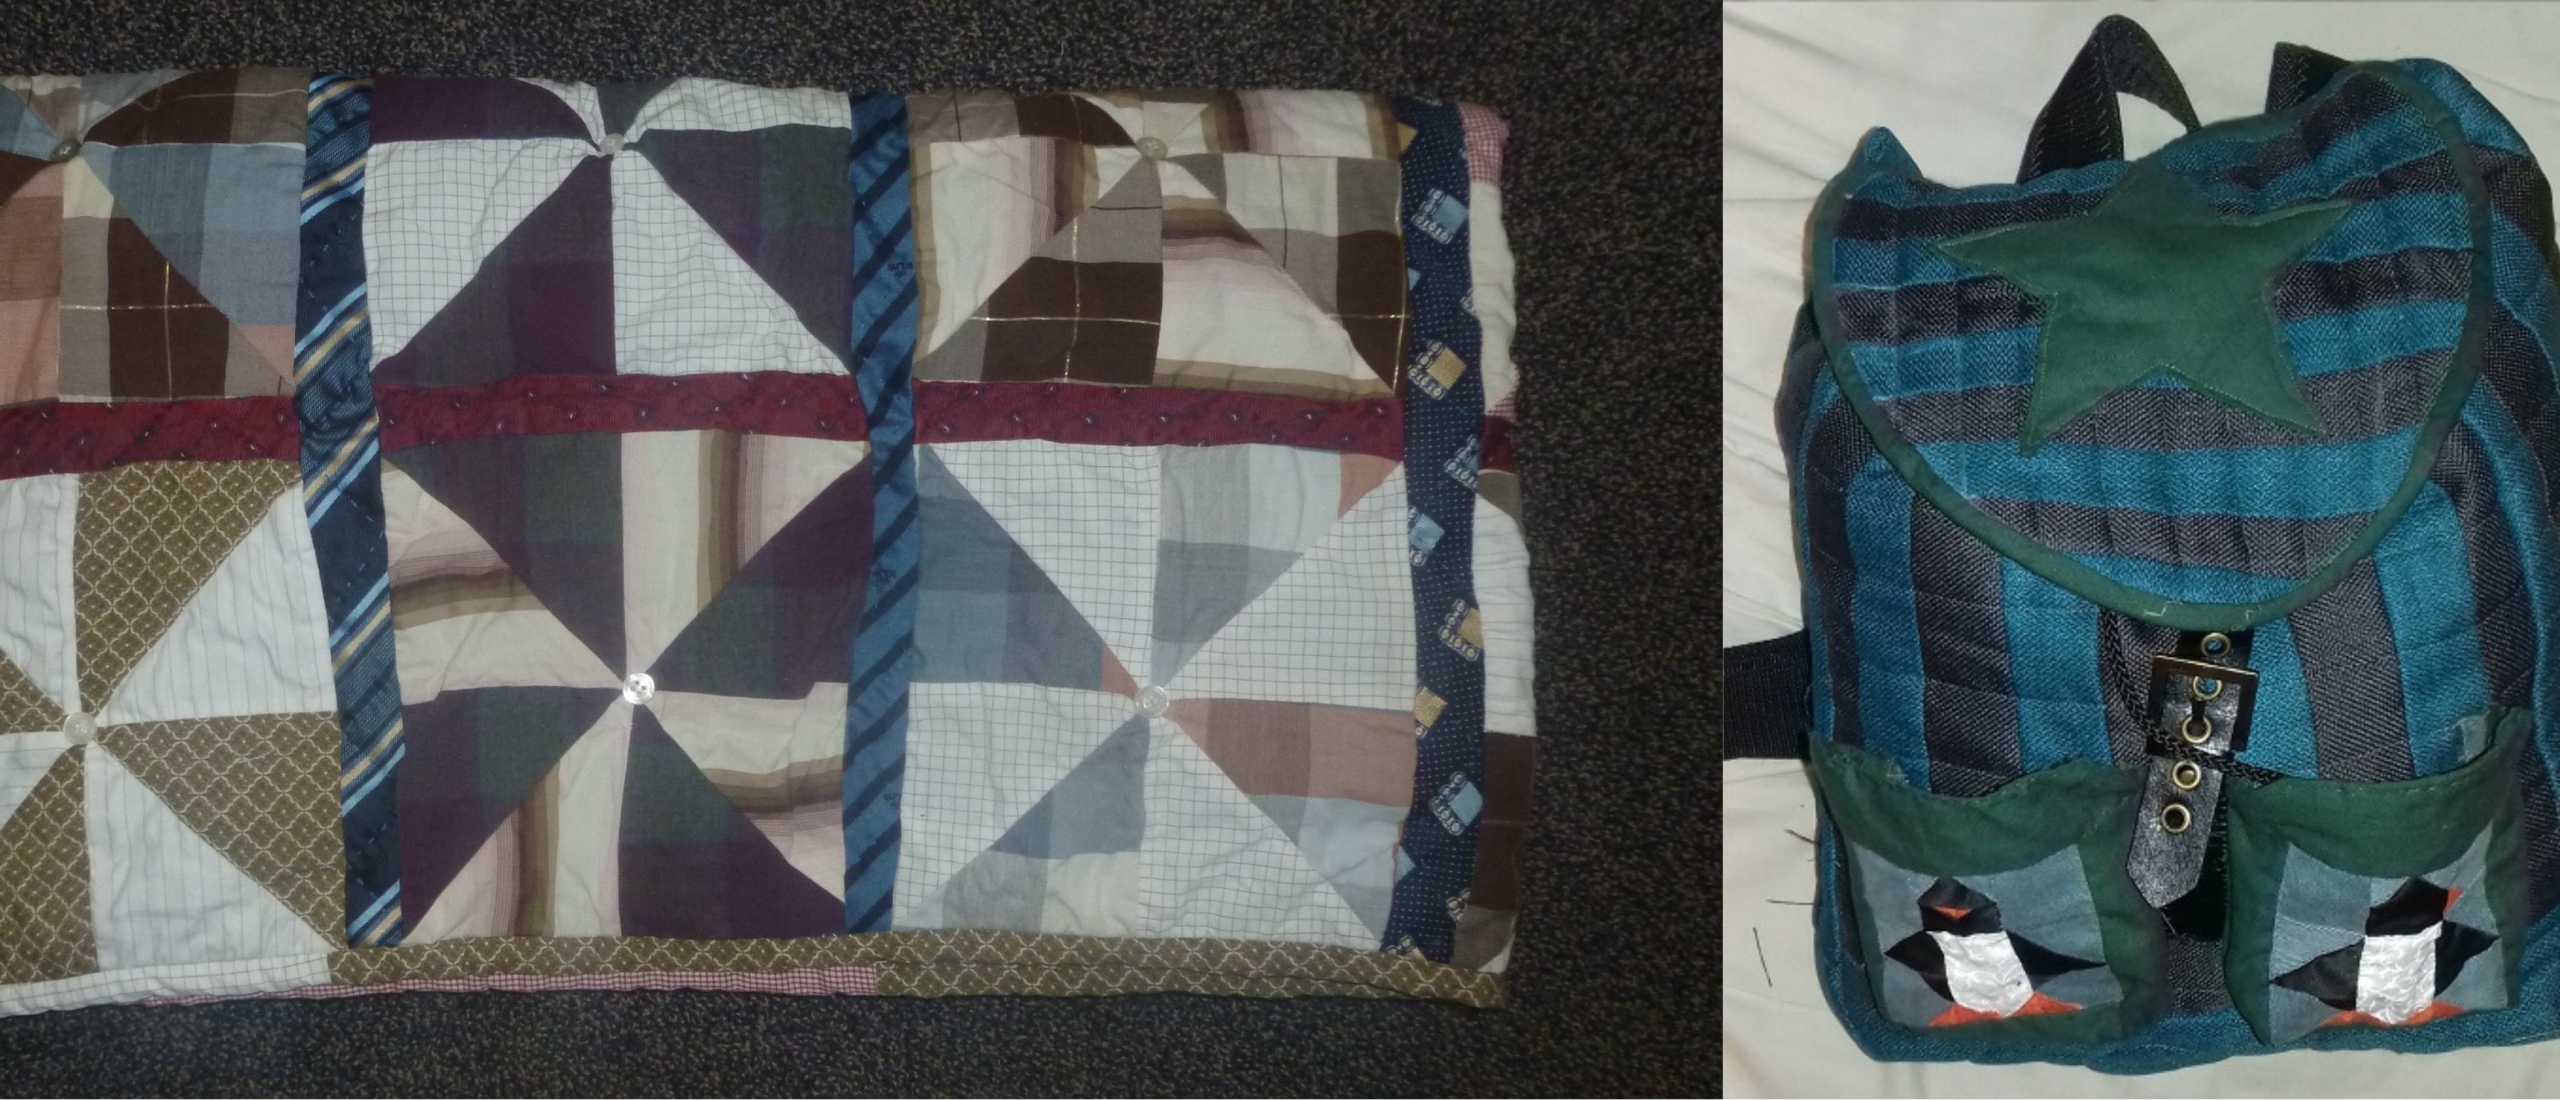 5 easy  principles to quilt sustainably